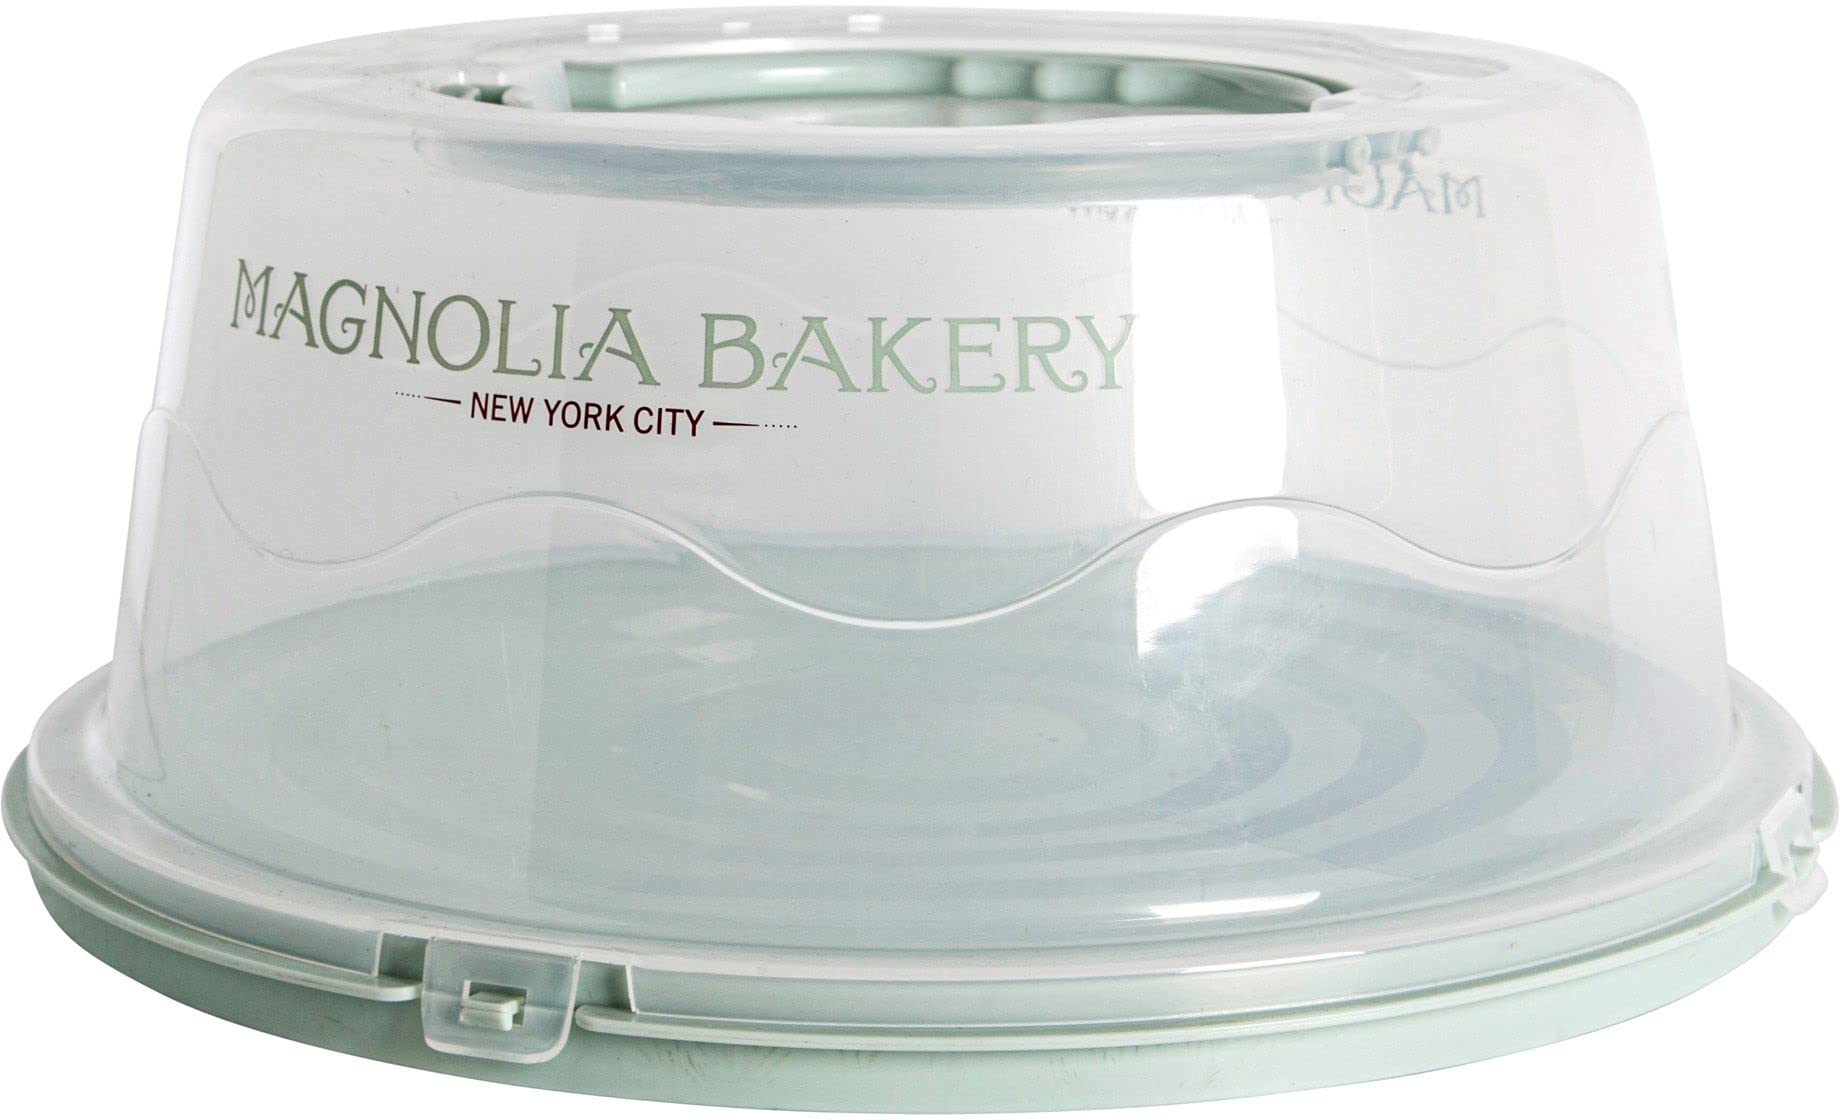 MAGNOLIA BAKERY ROUND CAKE CARRIER Practical Plastic Cake Keeper With Lid, Two Side Closures - Suitable For 12 Inch Cakes, Dishwasher safe.  - Like New